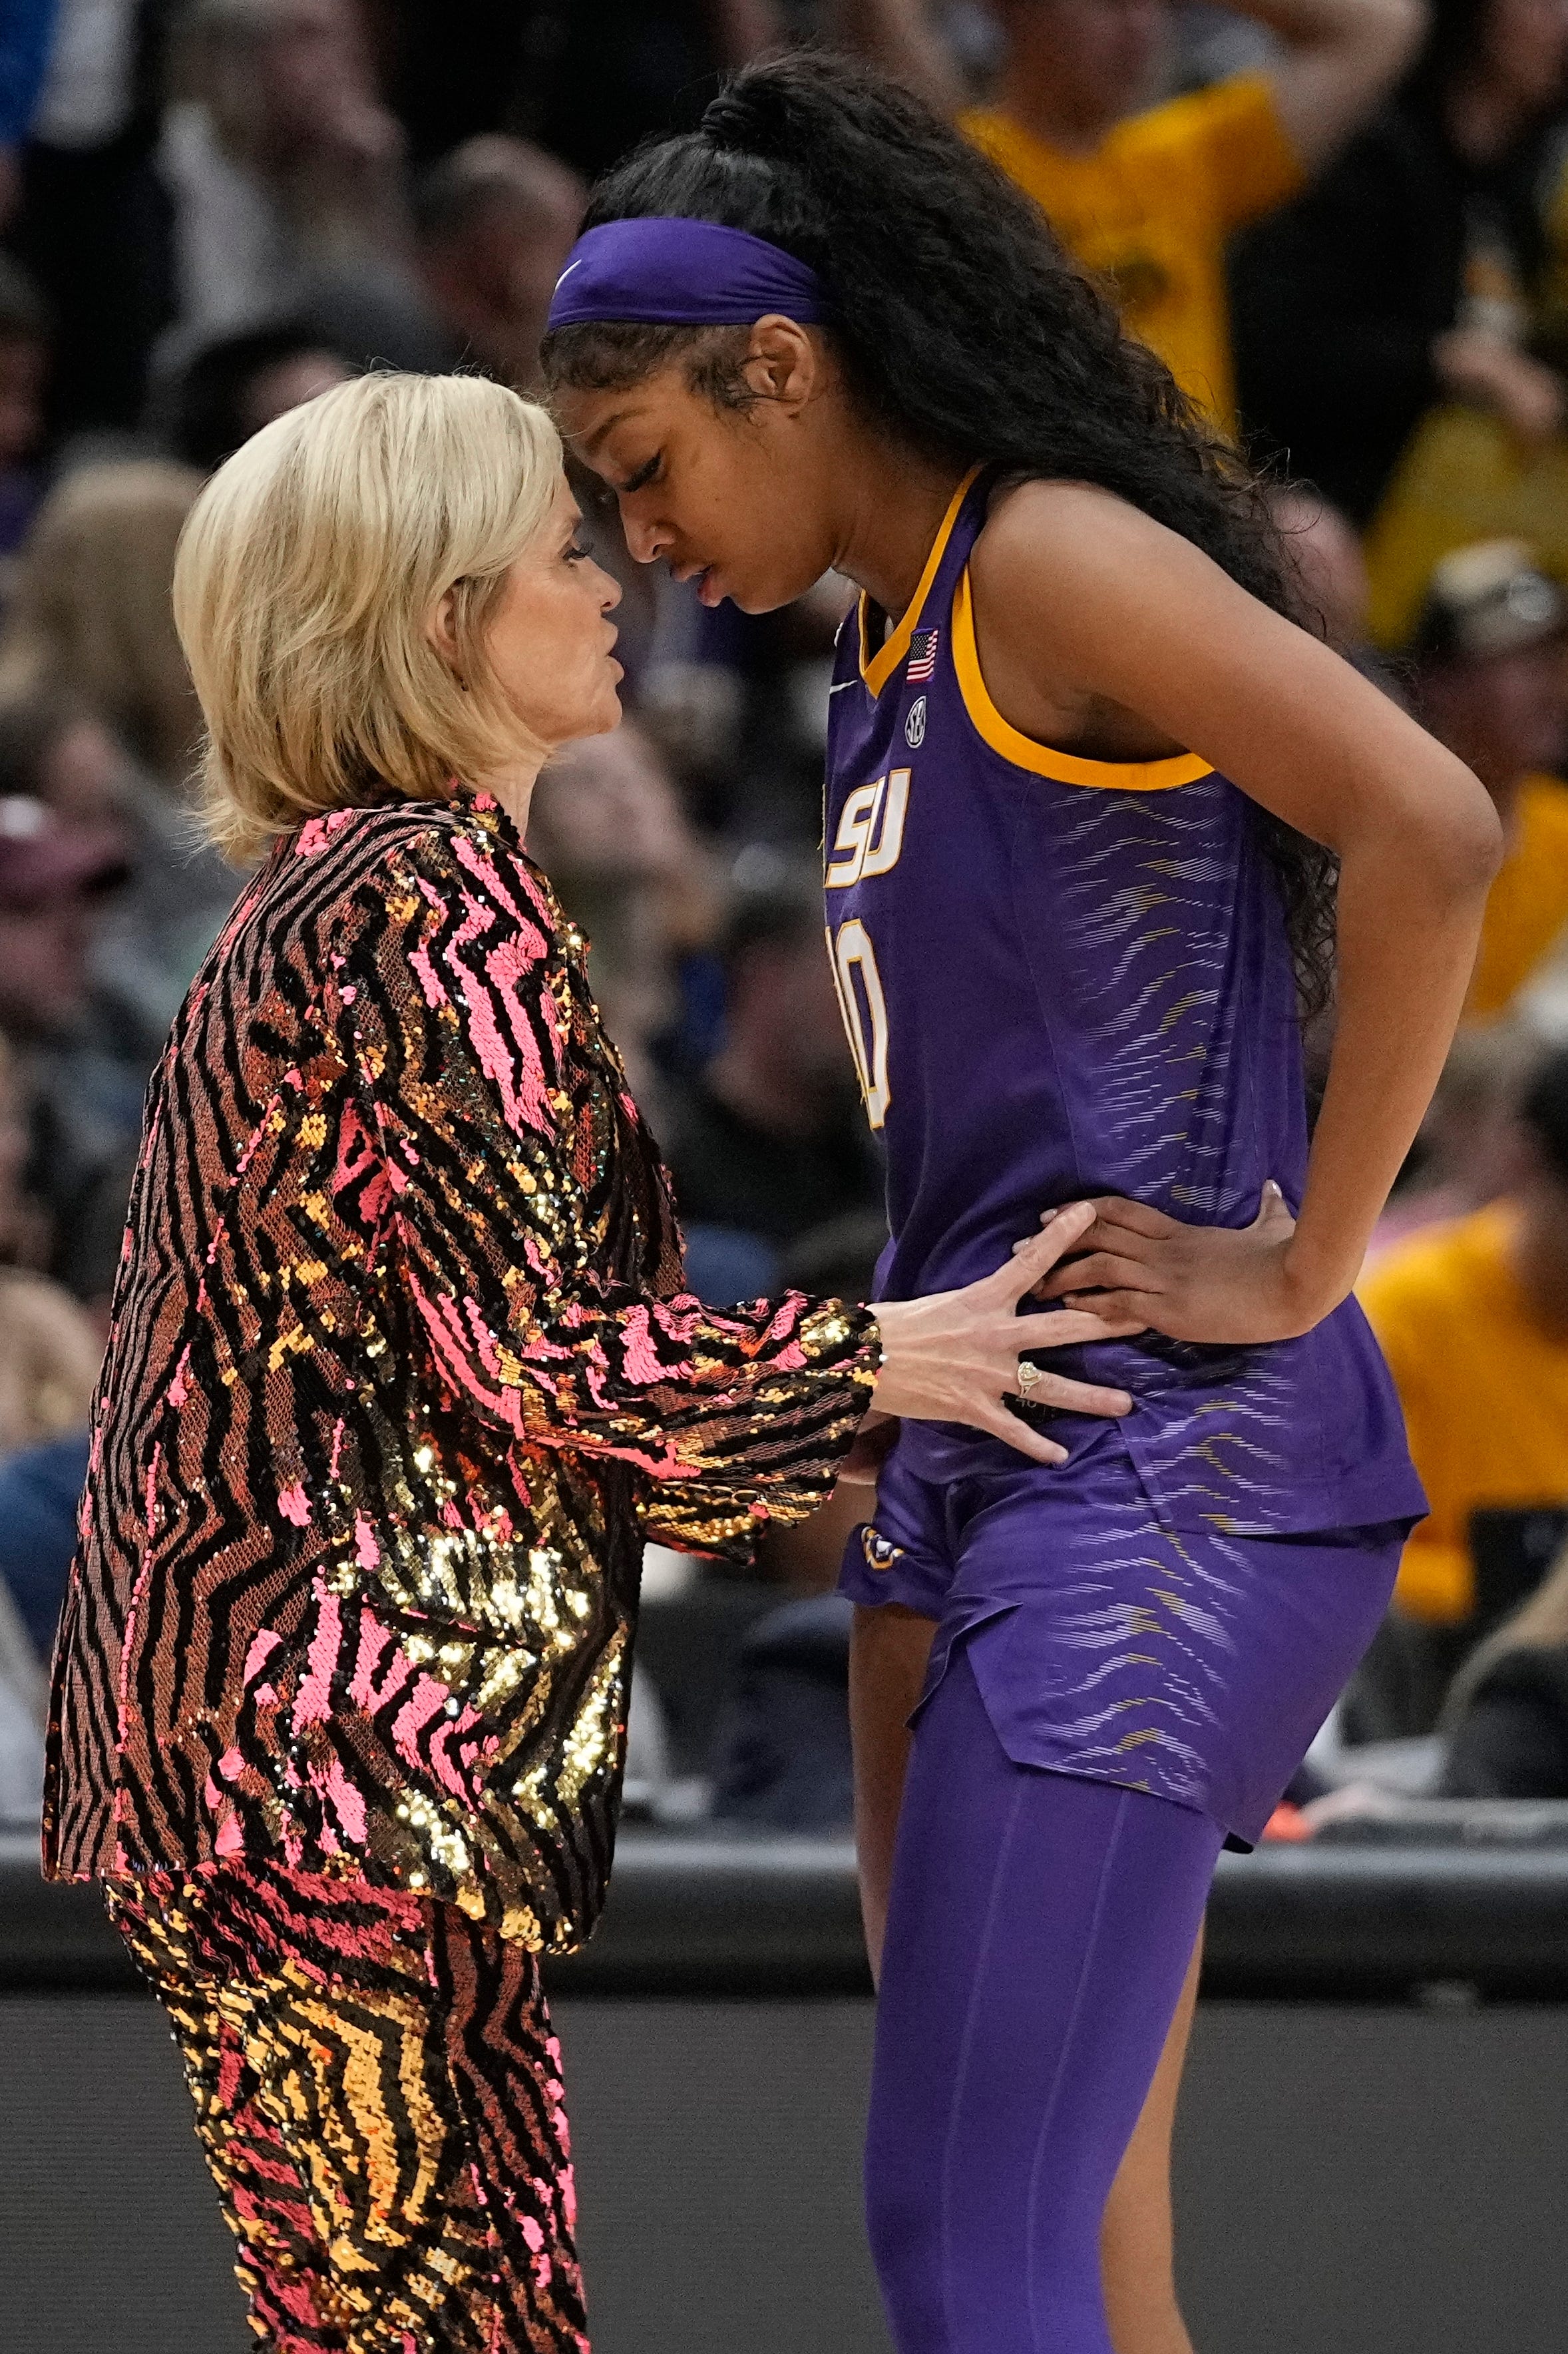 LSU head coach Kim Mulkey talks to Angel Reese during the second half of the NCAA Women's Final Four championship basketball game against Iowa Sunday, April 2, 2023, in Dallas. (AP Photo/Darron Cummings)